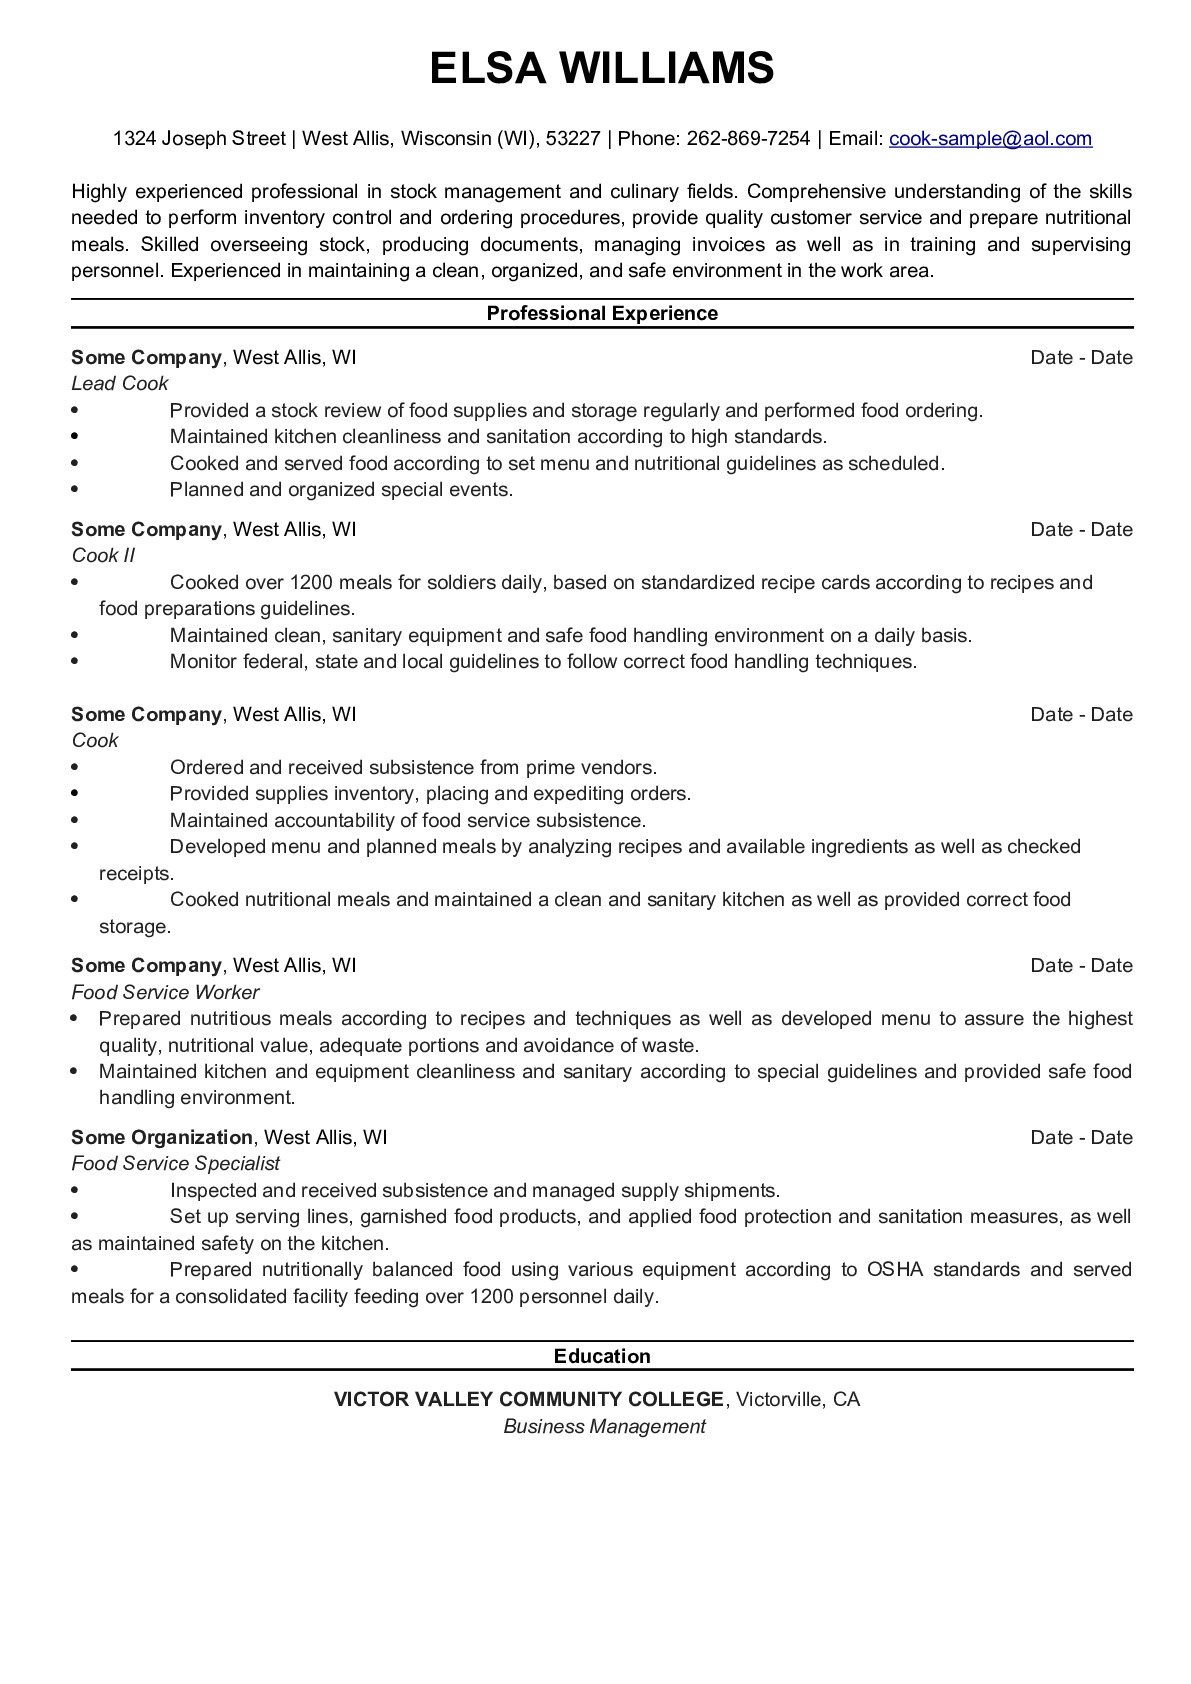 Resume Example for Cook